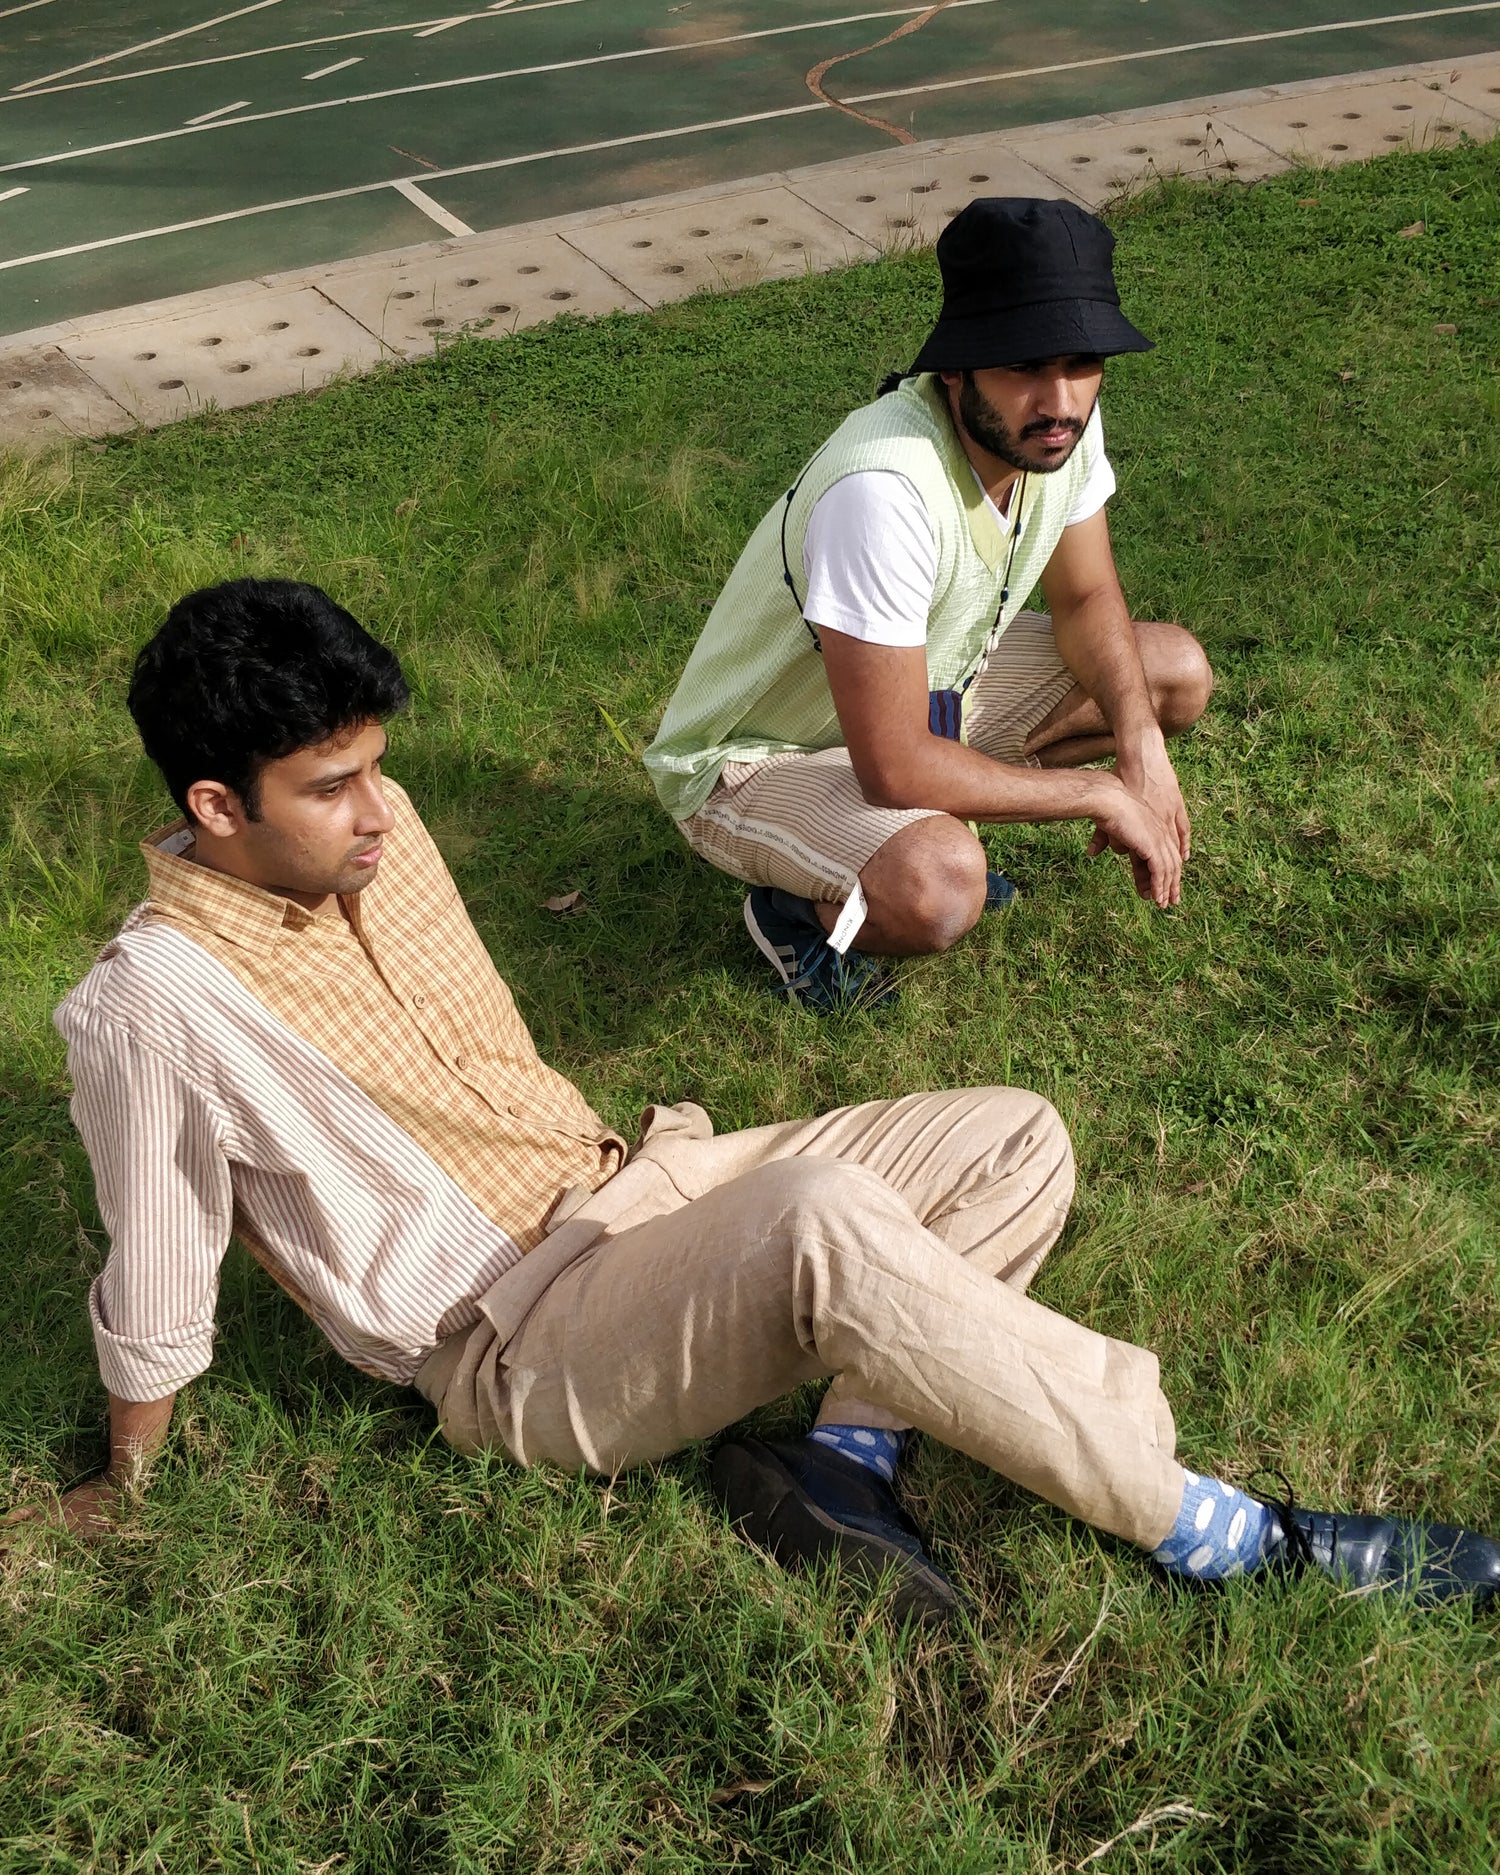 Two young men sitting on grass in comfortable clothes by KiRu. Checks and brown